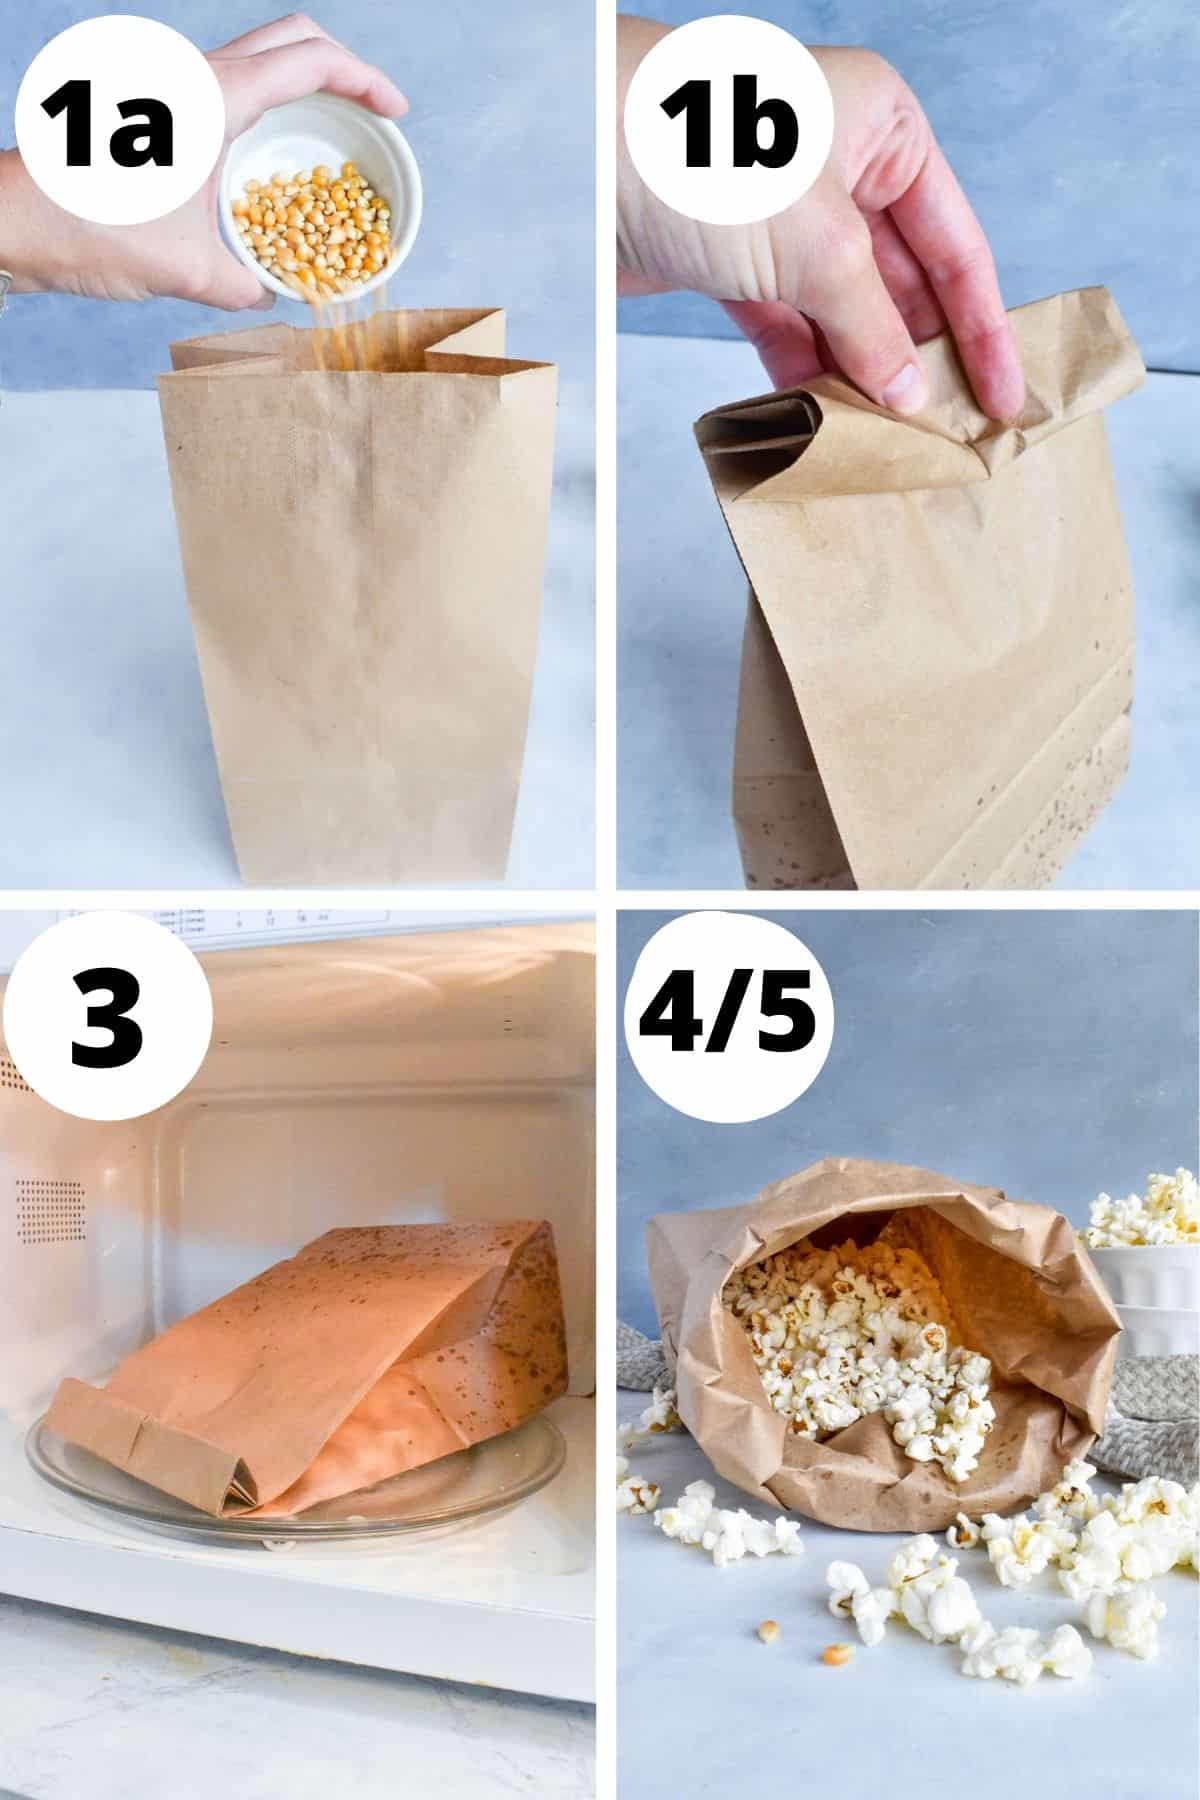 4 images showing how to make popcorn in a paperbag. 